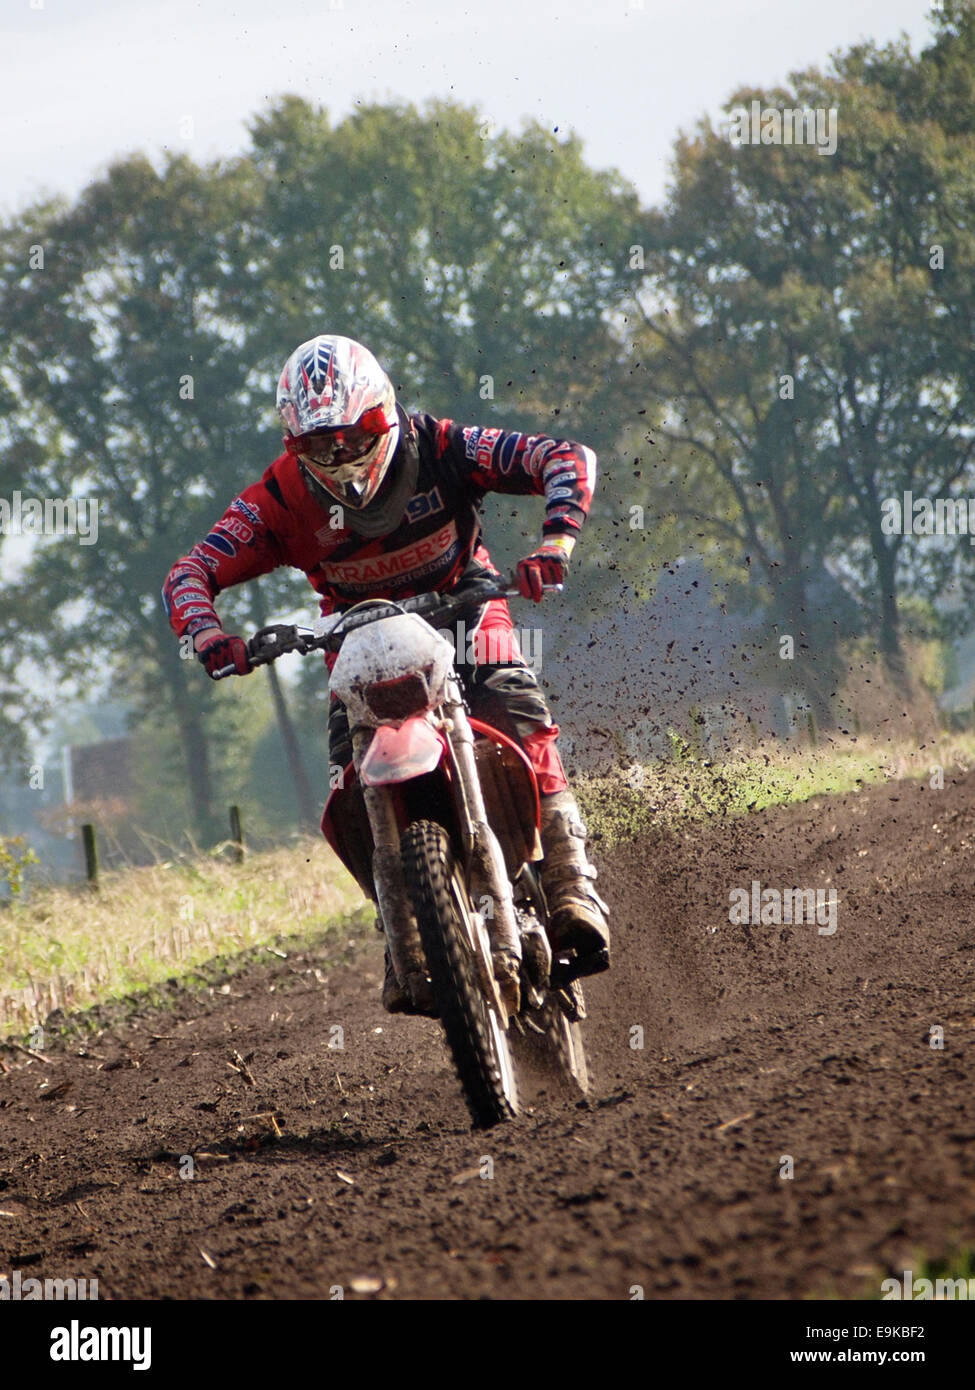 Honda cross motorcycle rider riding through field, front view, Ruurlo, the Netherlands Stock Photo